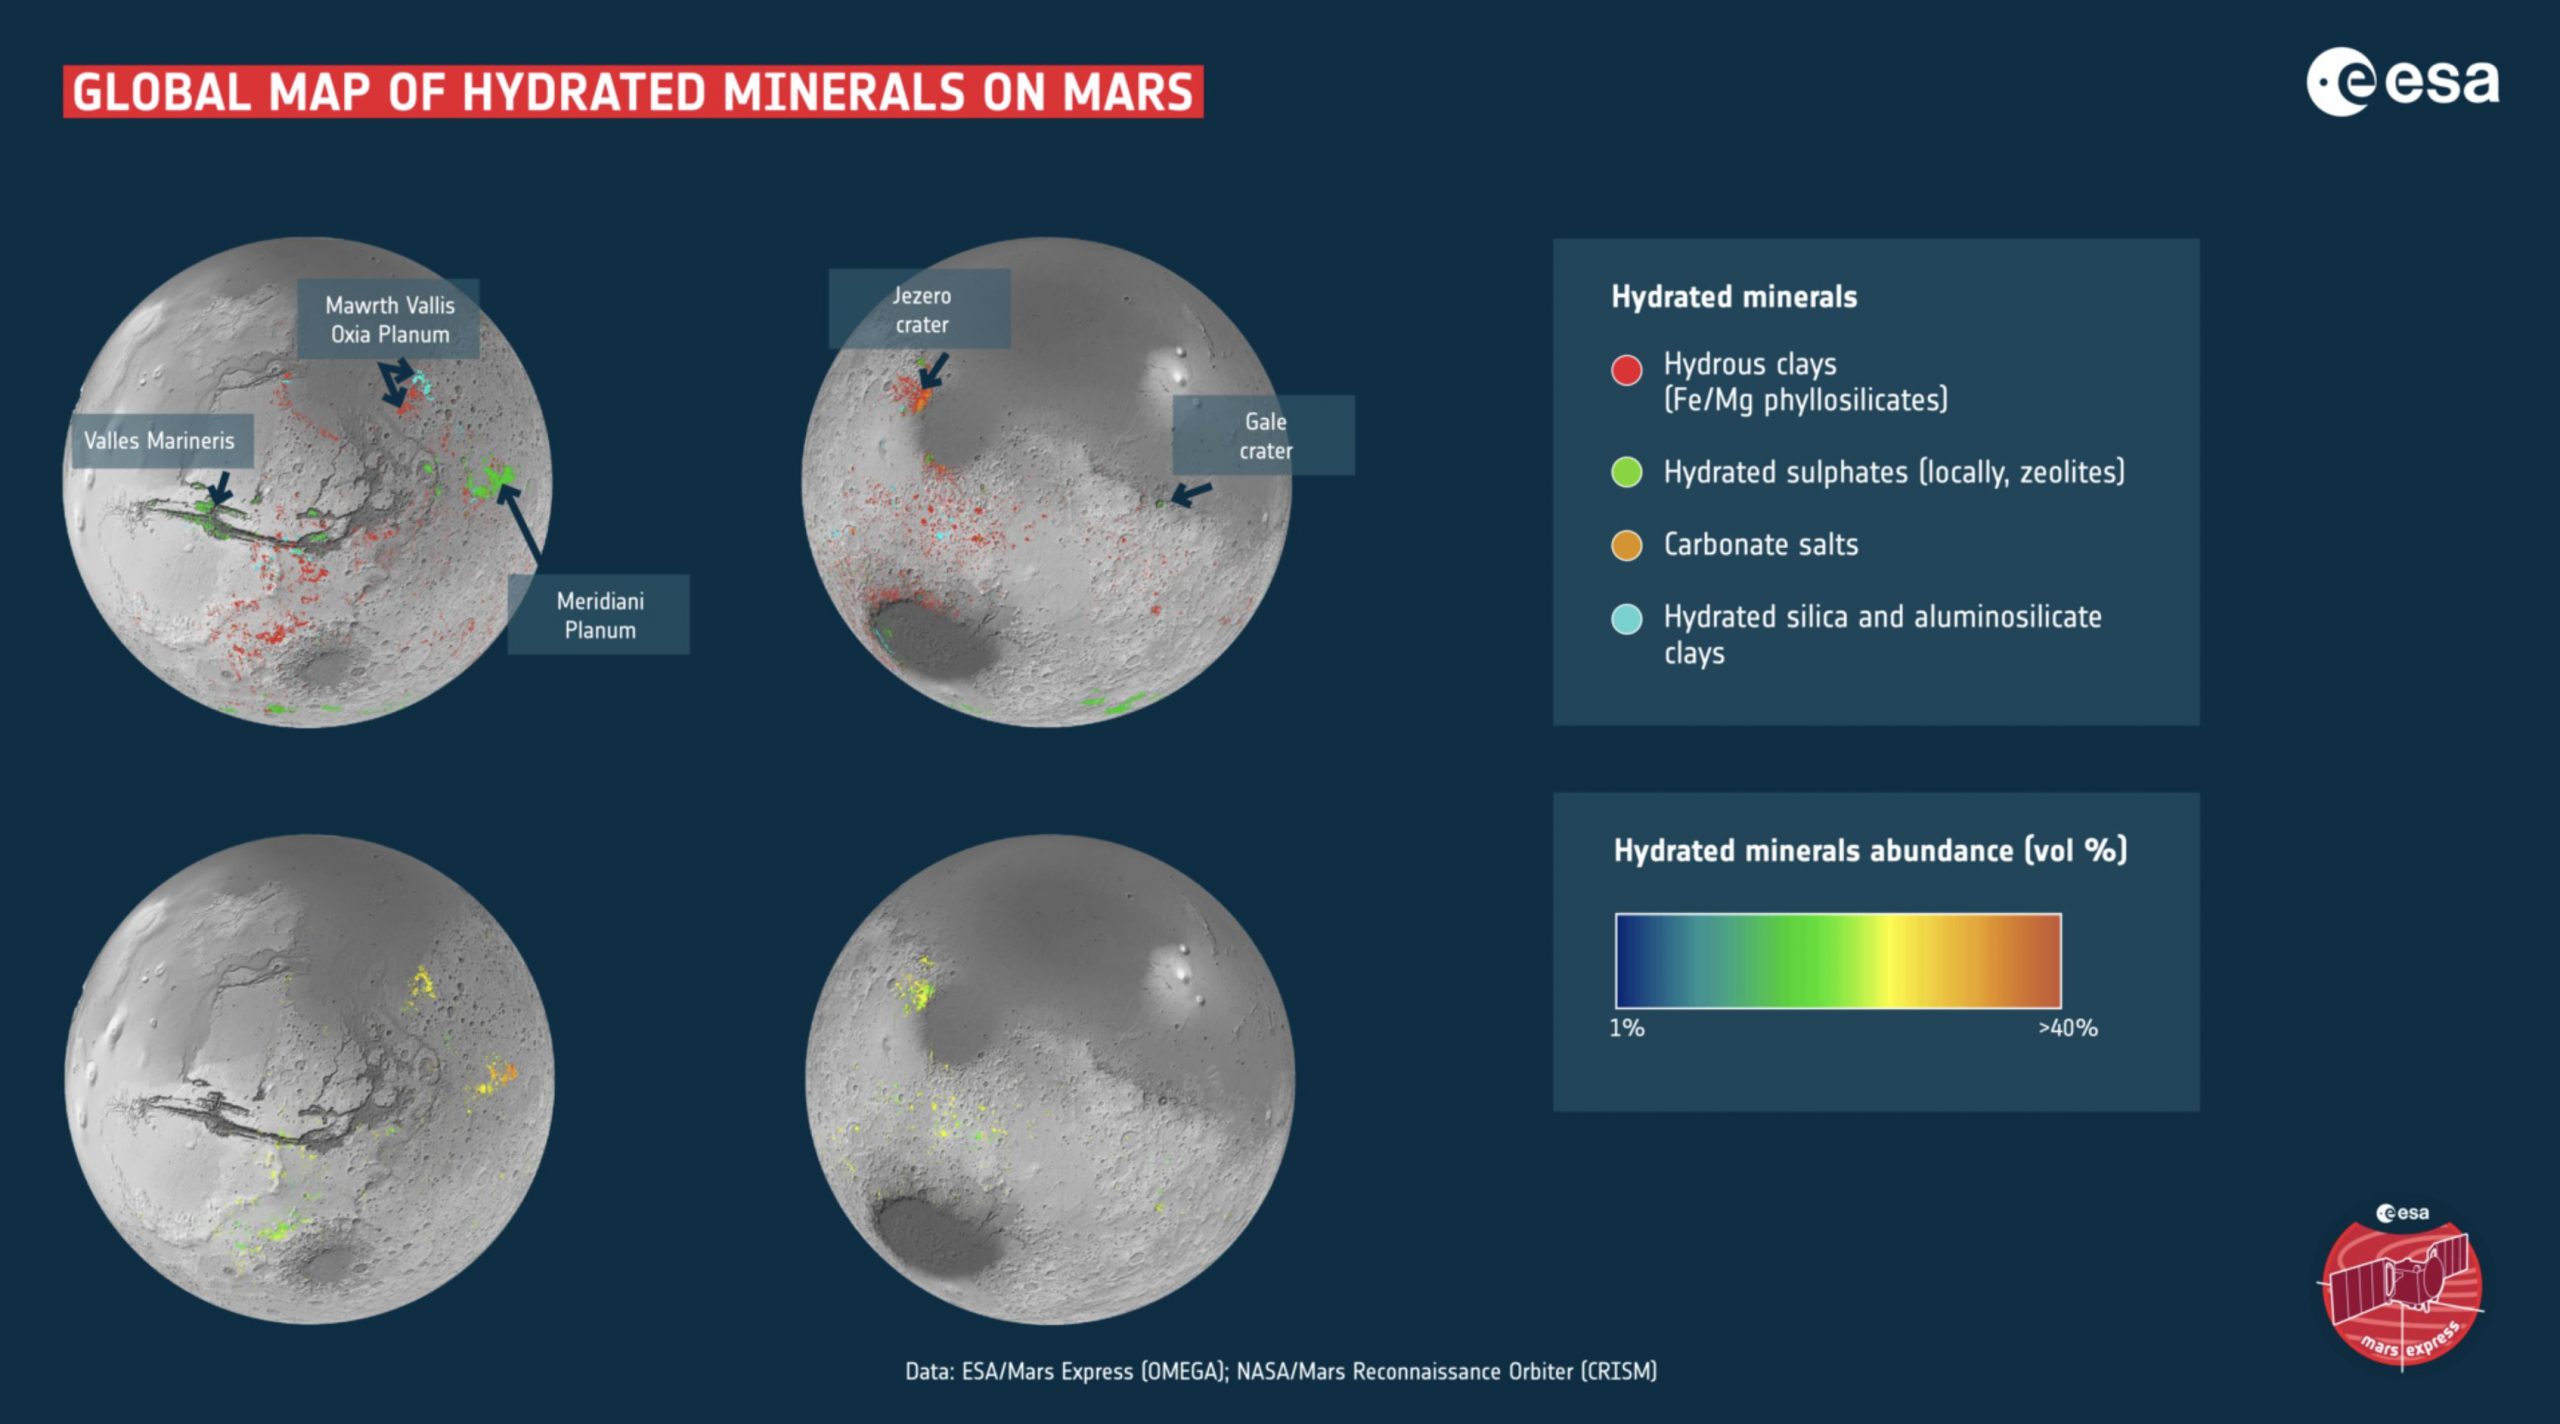 An illustration showing a global map of hydrated minerals on Mars. Image Credit: ESA/Mars Express (OMEGA) and NASA/Mars Reconnaissance Orbiter (CRISM).